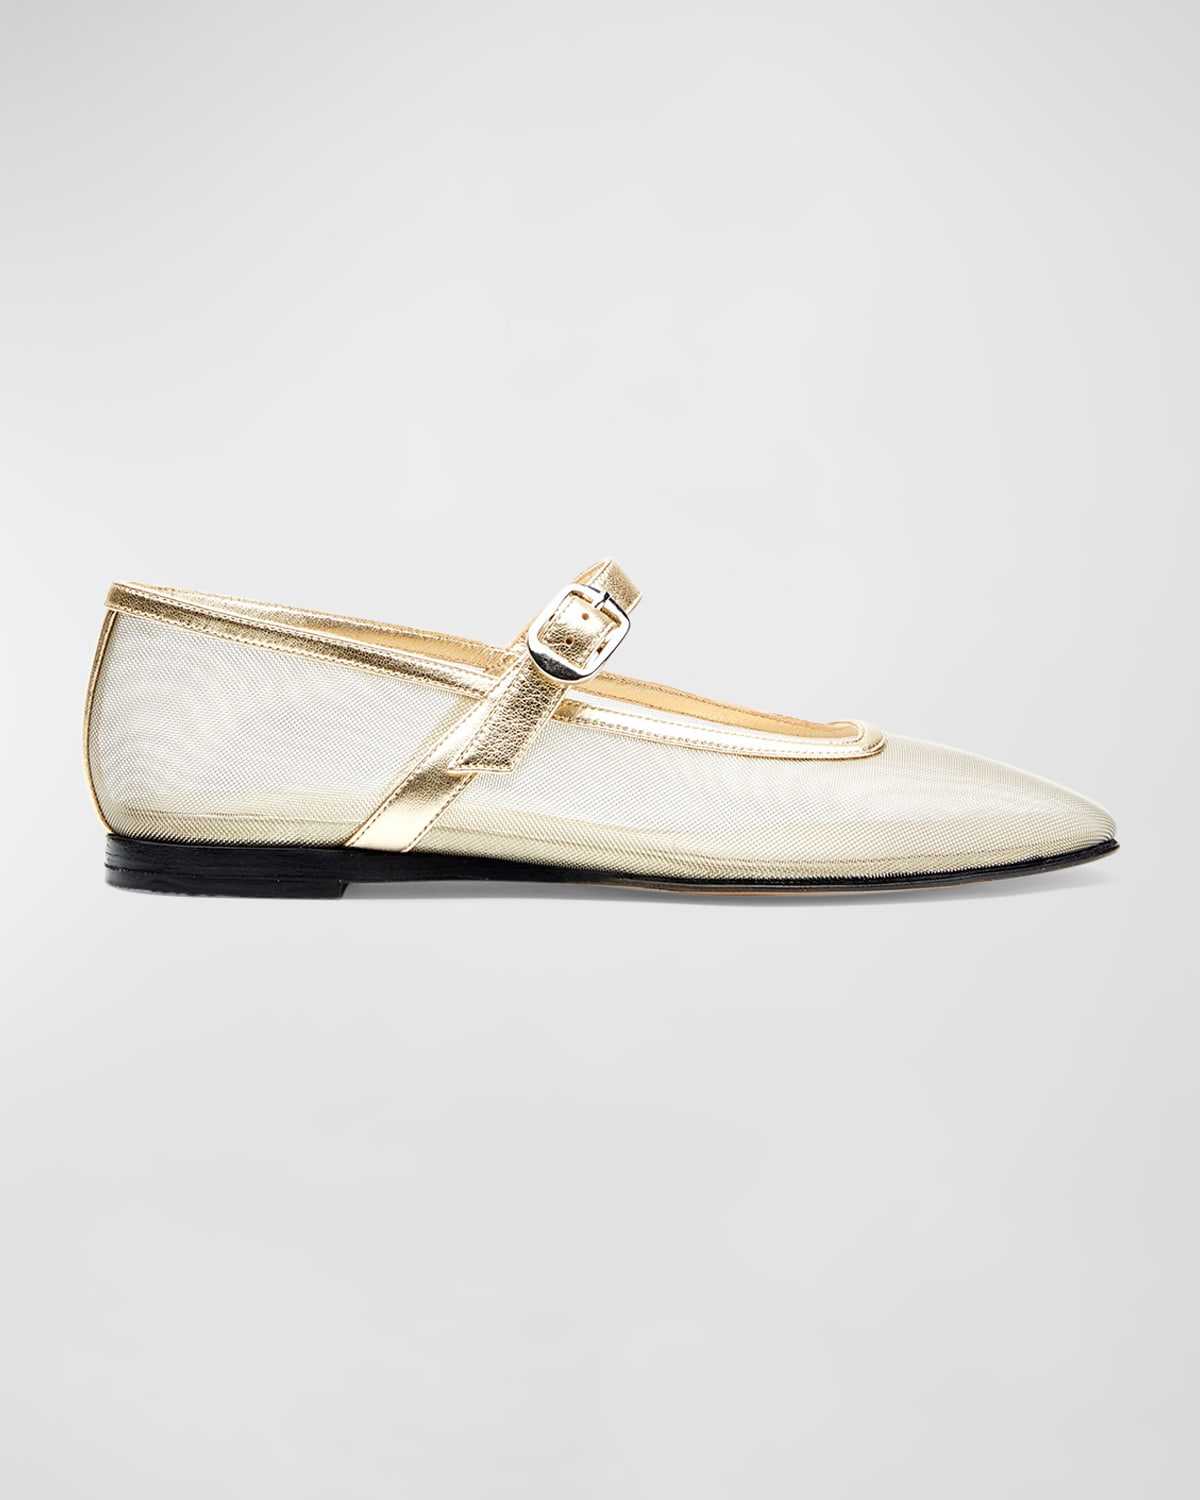 Le Monde Beryl Mesh Mary Jane Ballet Flats In Gold